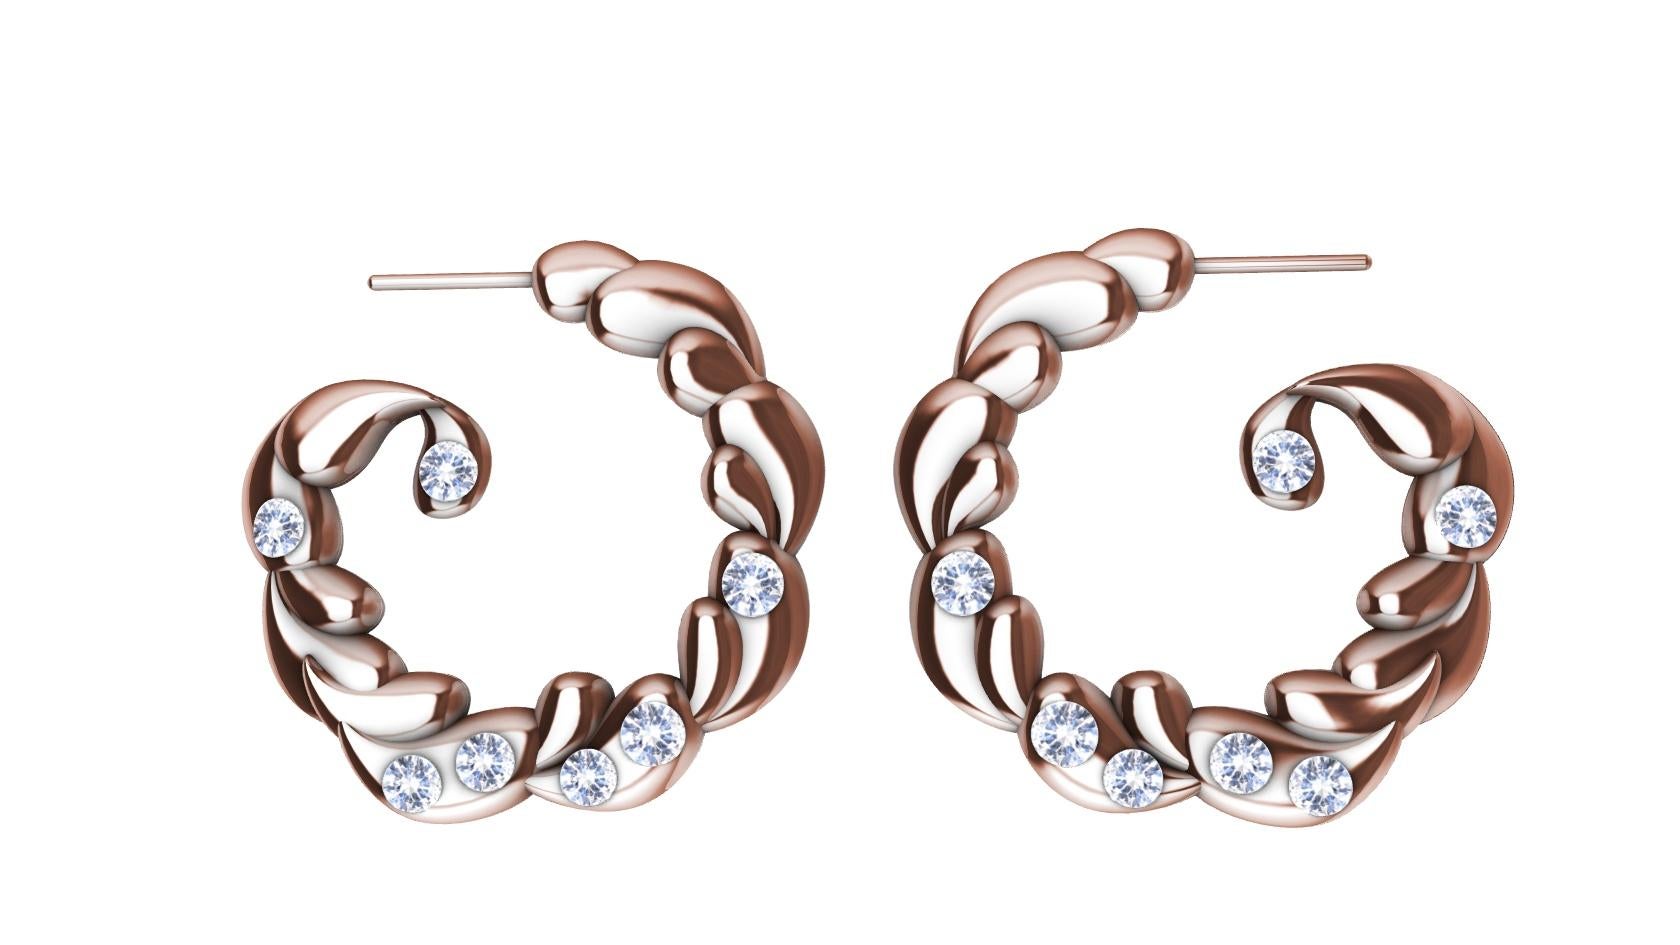 14 Karat Rose Gold & White Sapphires Wave Hoop Earrings, Tiffany designer, Thomas Kurilla Welcomes the new Light , Water, Mind Collection. Getting 2 herniated discs in 2018 , and the discovery of Cyrotherapy in 2020. The injury became an